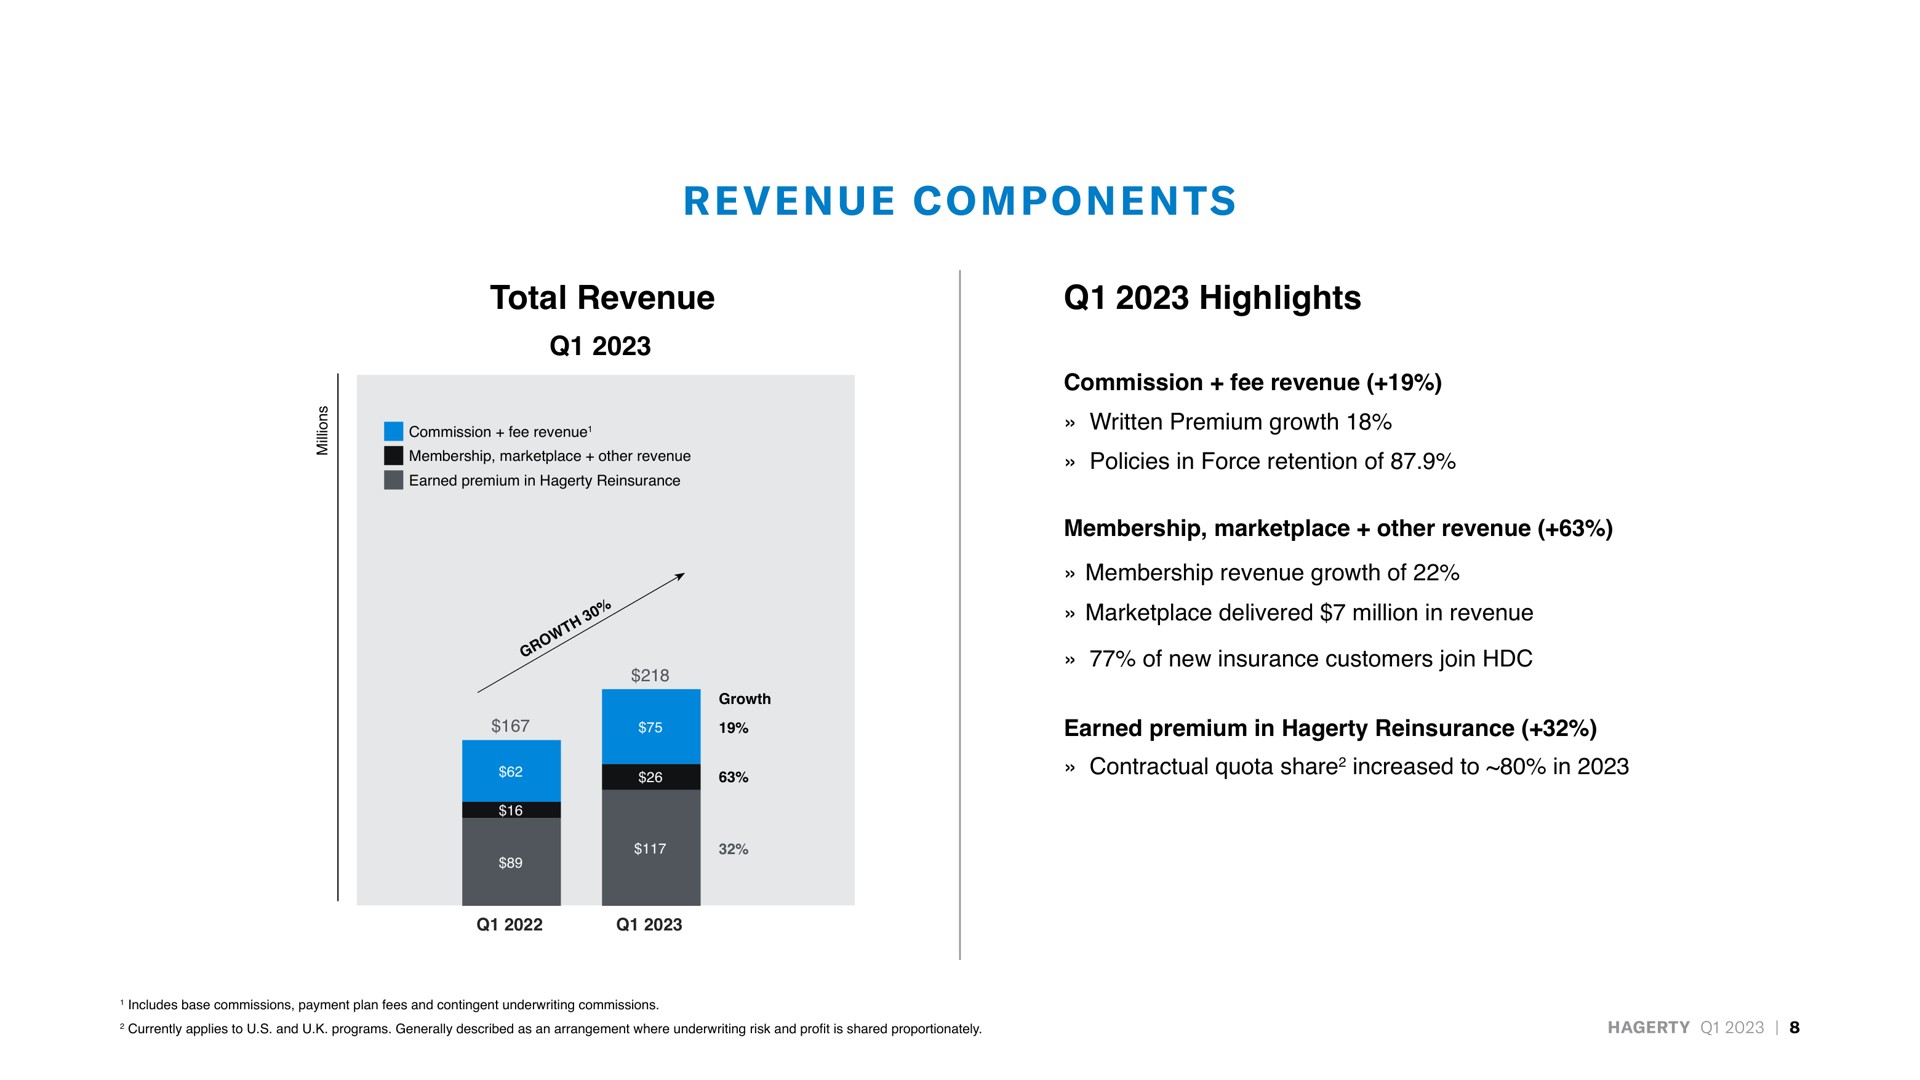 total revenue highlights commission fee revenue written premium growth policies in force retention of membership other revenue membership revenue growth of delivered million in revenue of new insurance customers join earned premium in reinsurance contractual quota share increased to in components rep share | Hagerty